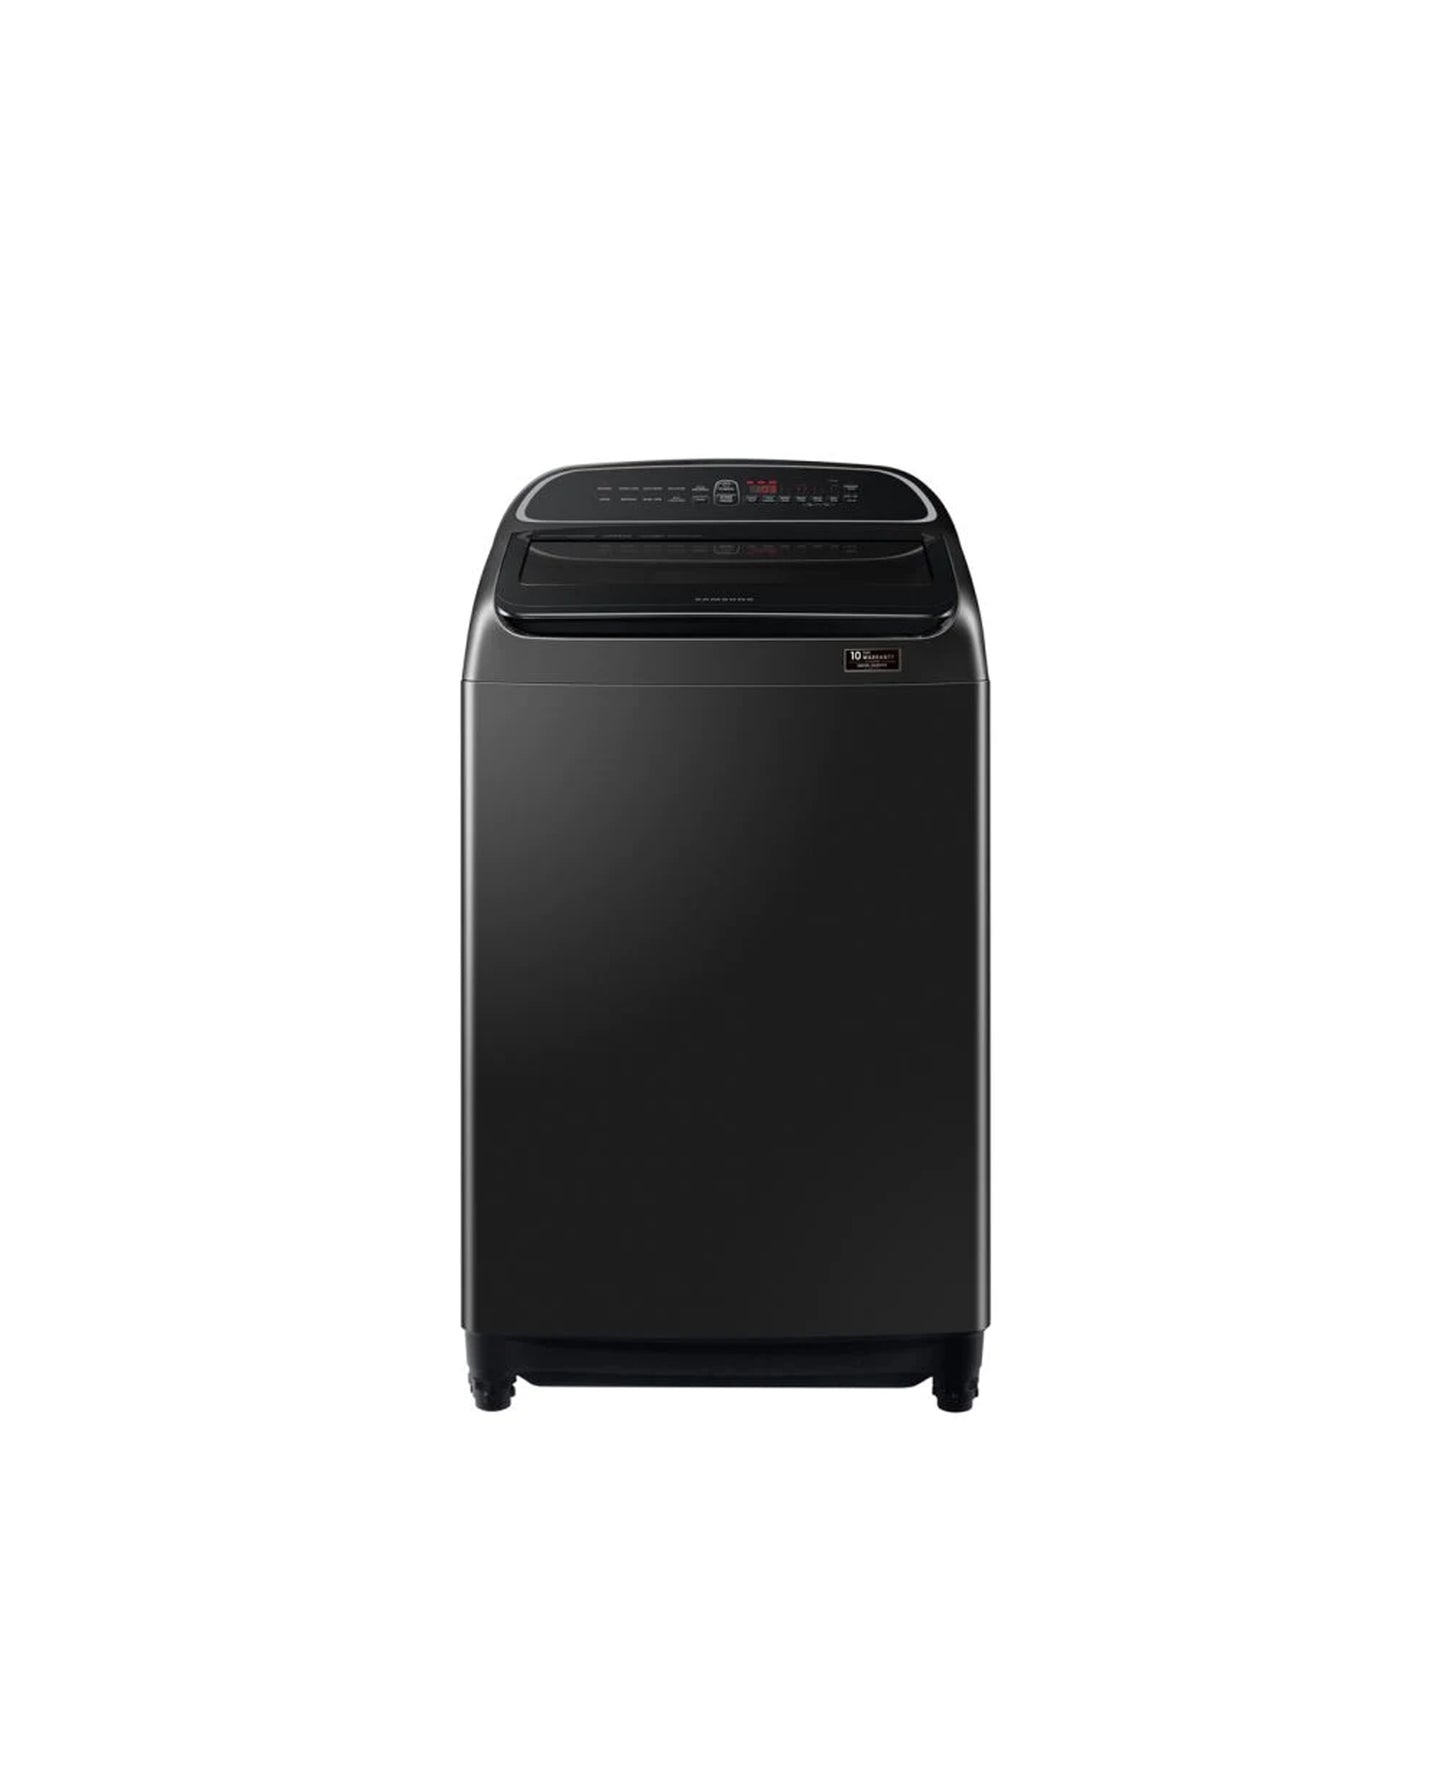 Samsung 17kg Top Loader With Wobble Tech - Black